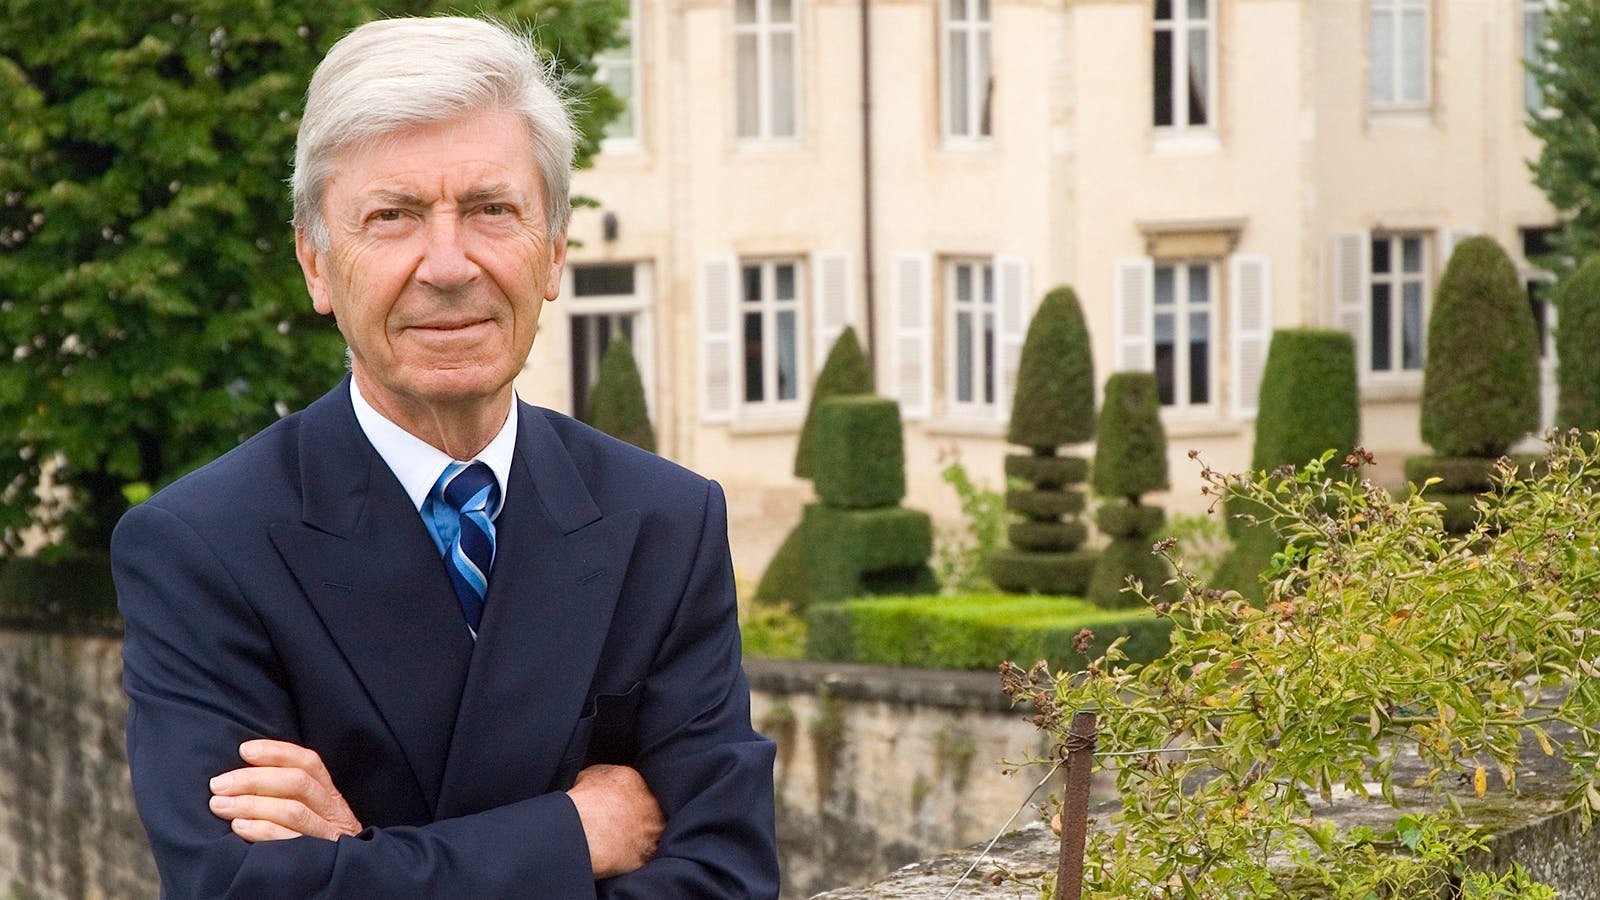 Joseph Henriot, Powerhouse Wine Executive in Burgundy and Champagne, Dies at 78